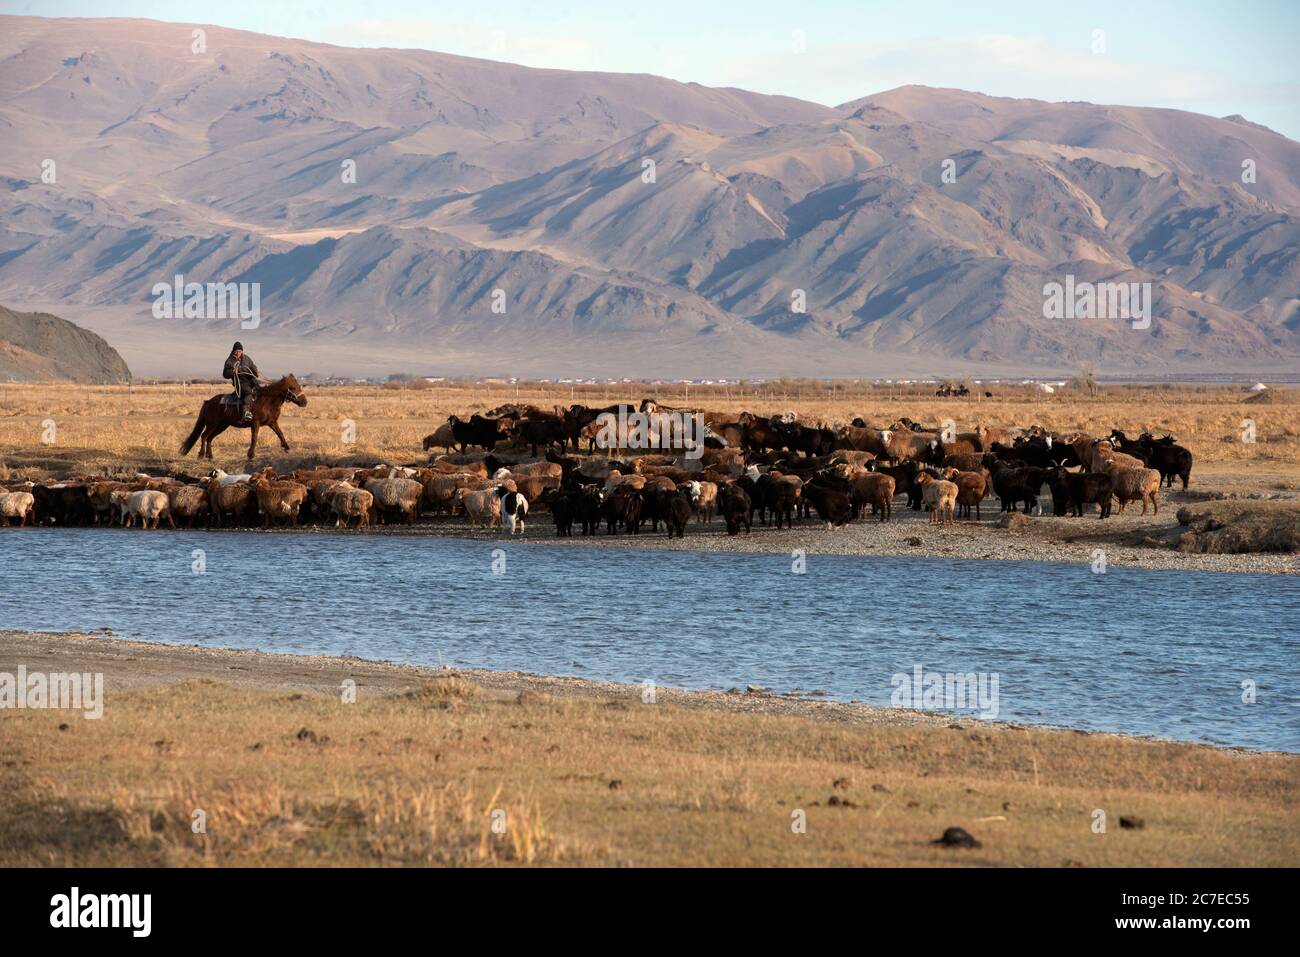 A nomadic Kazakh herder on horseback driving his herd of cattle across a river in the Altai Mountains, western Mongolia. Stock Photo